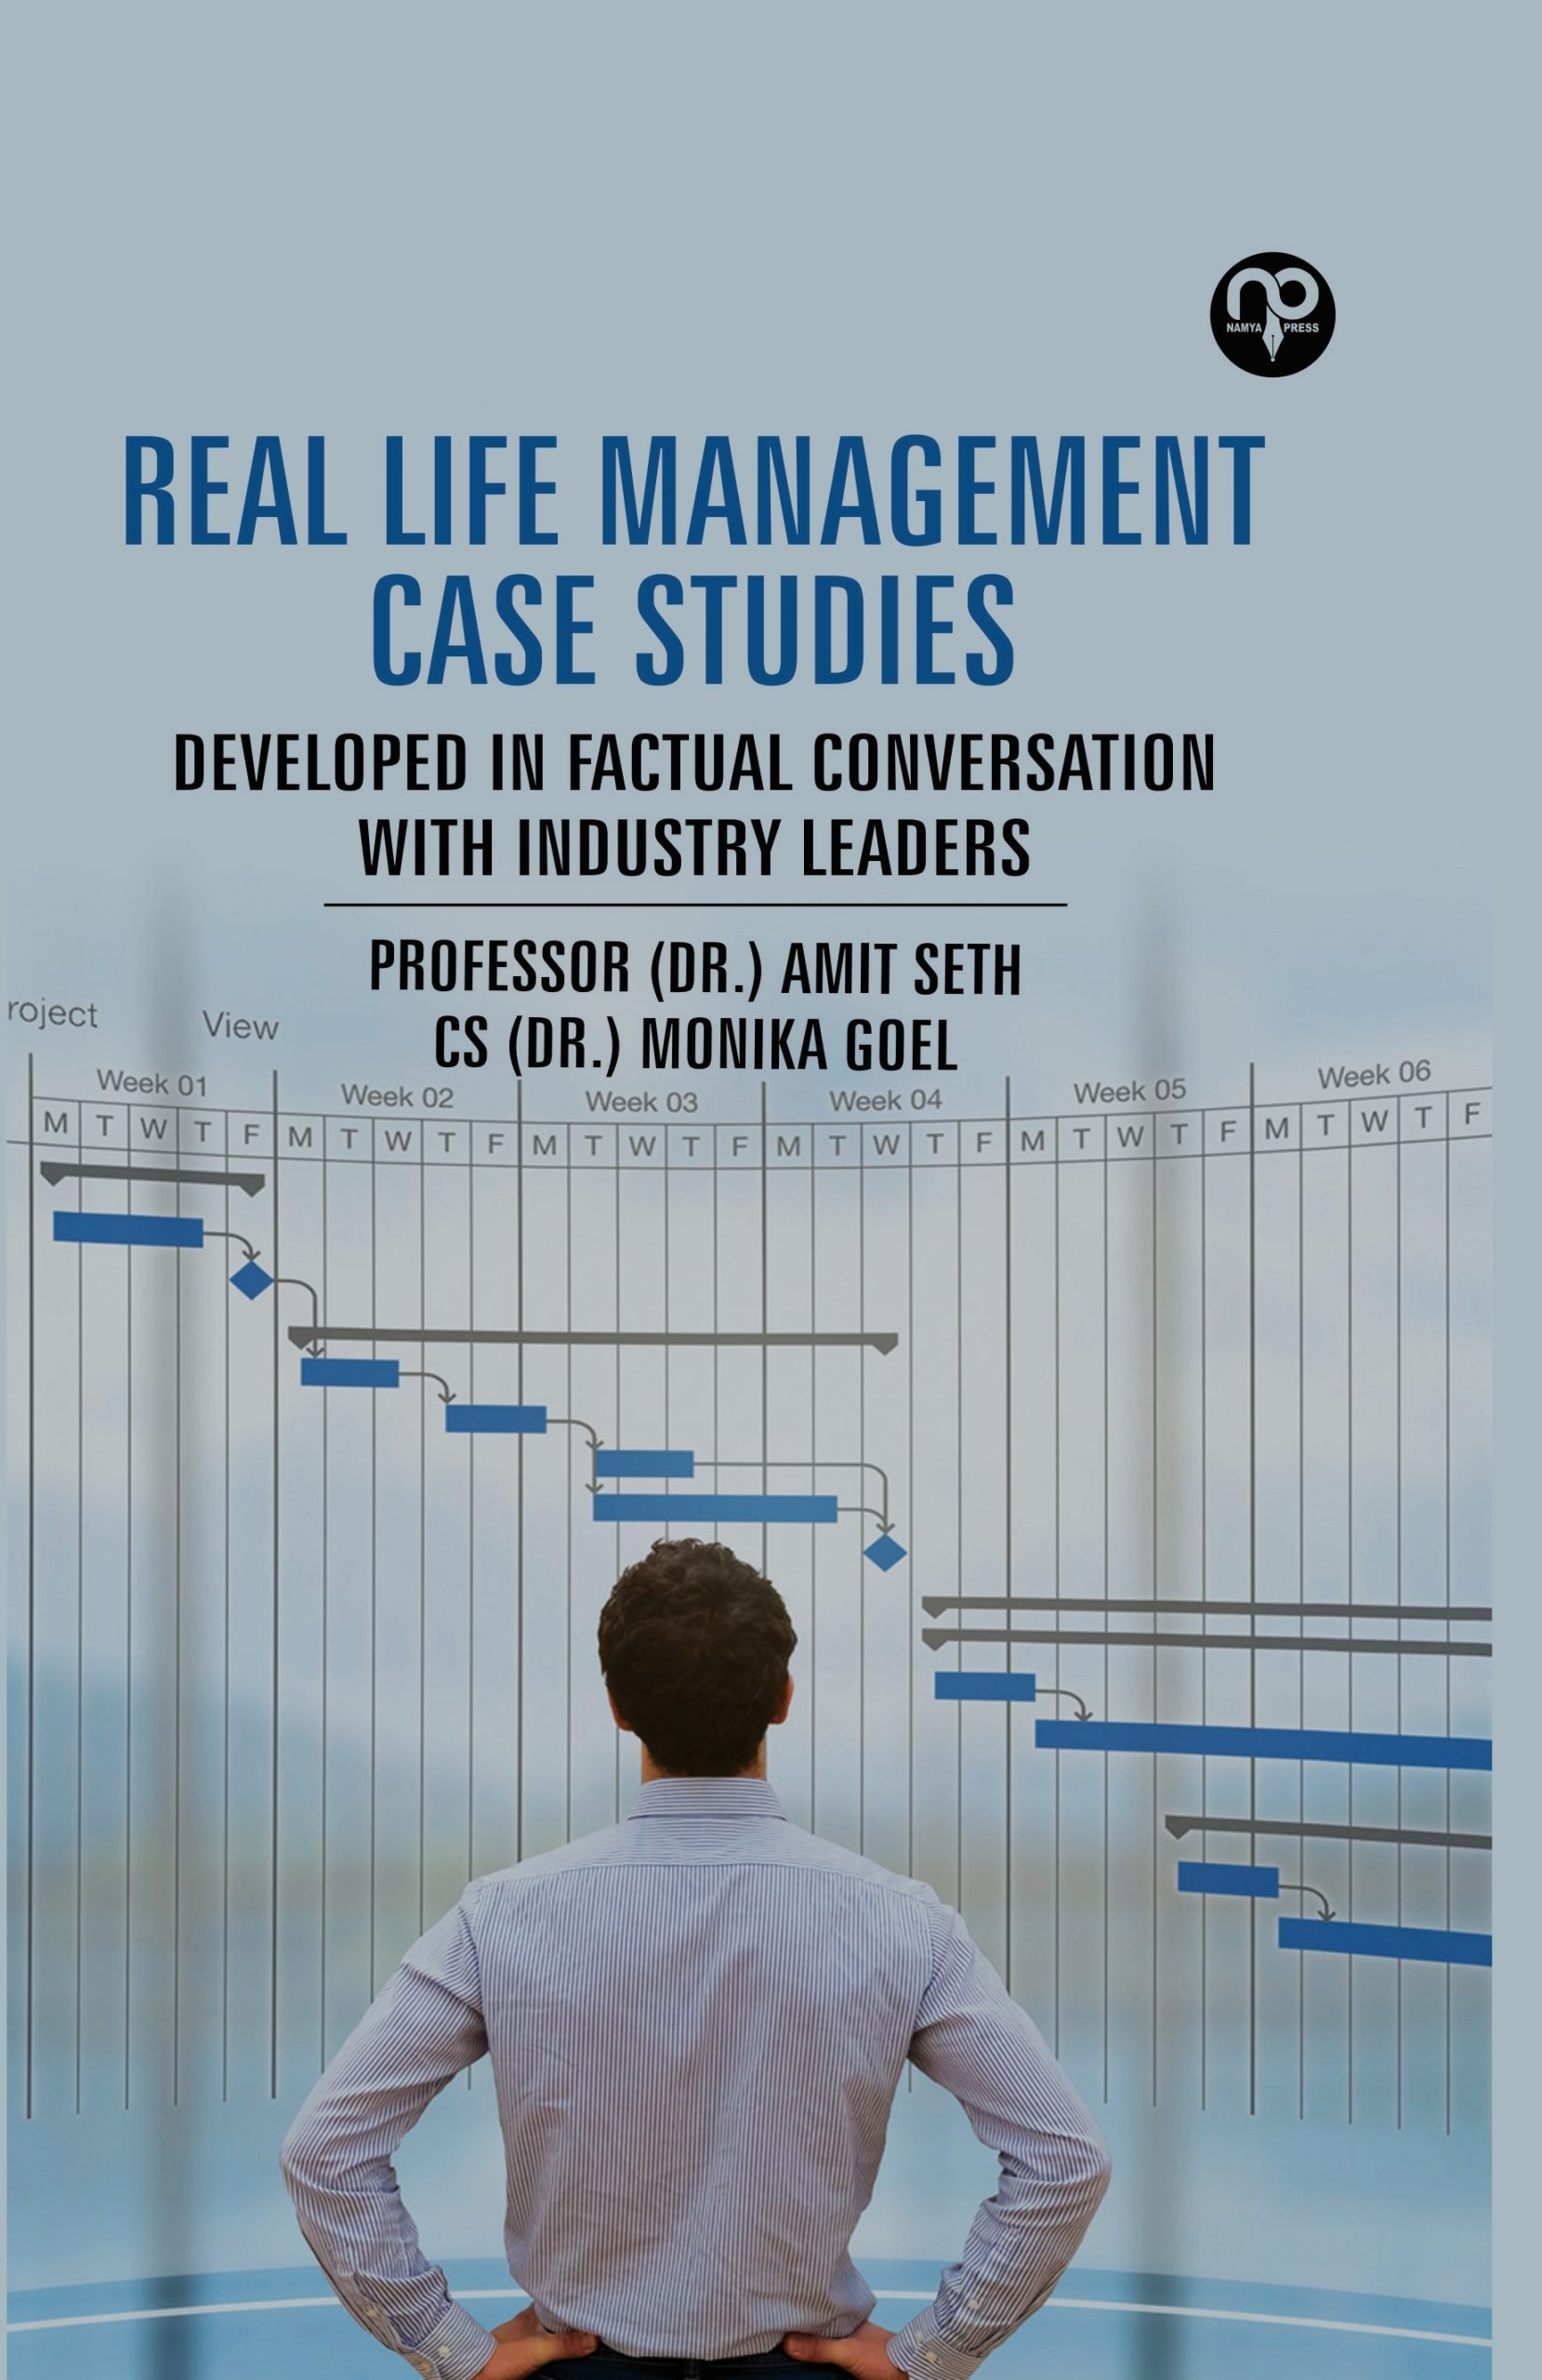 Real Life Management Case Studies - Developed In Factual Conversation With Industry Leaders